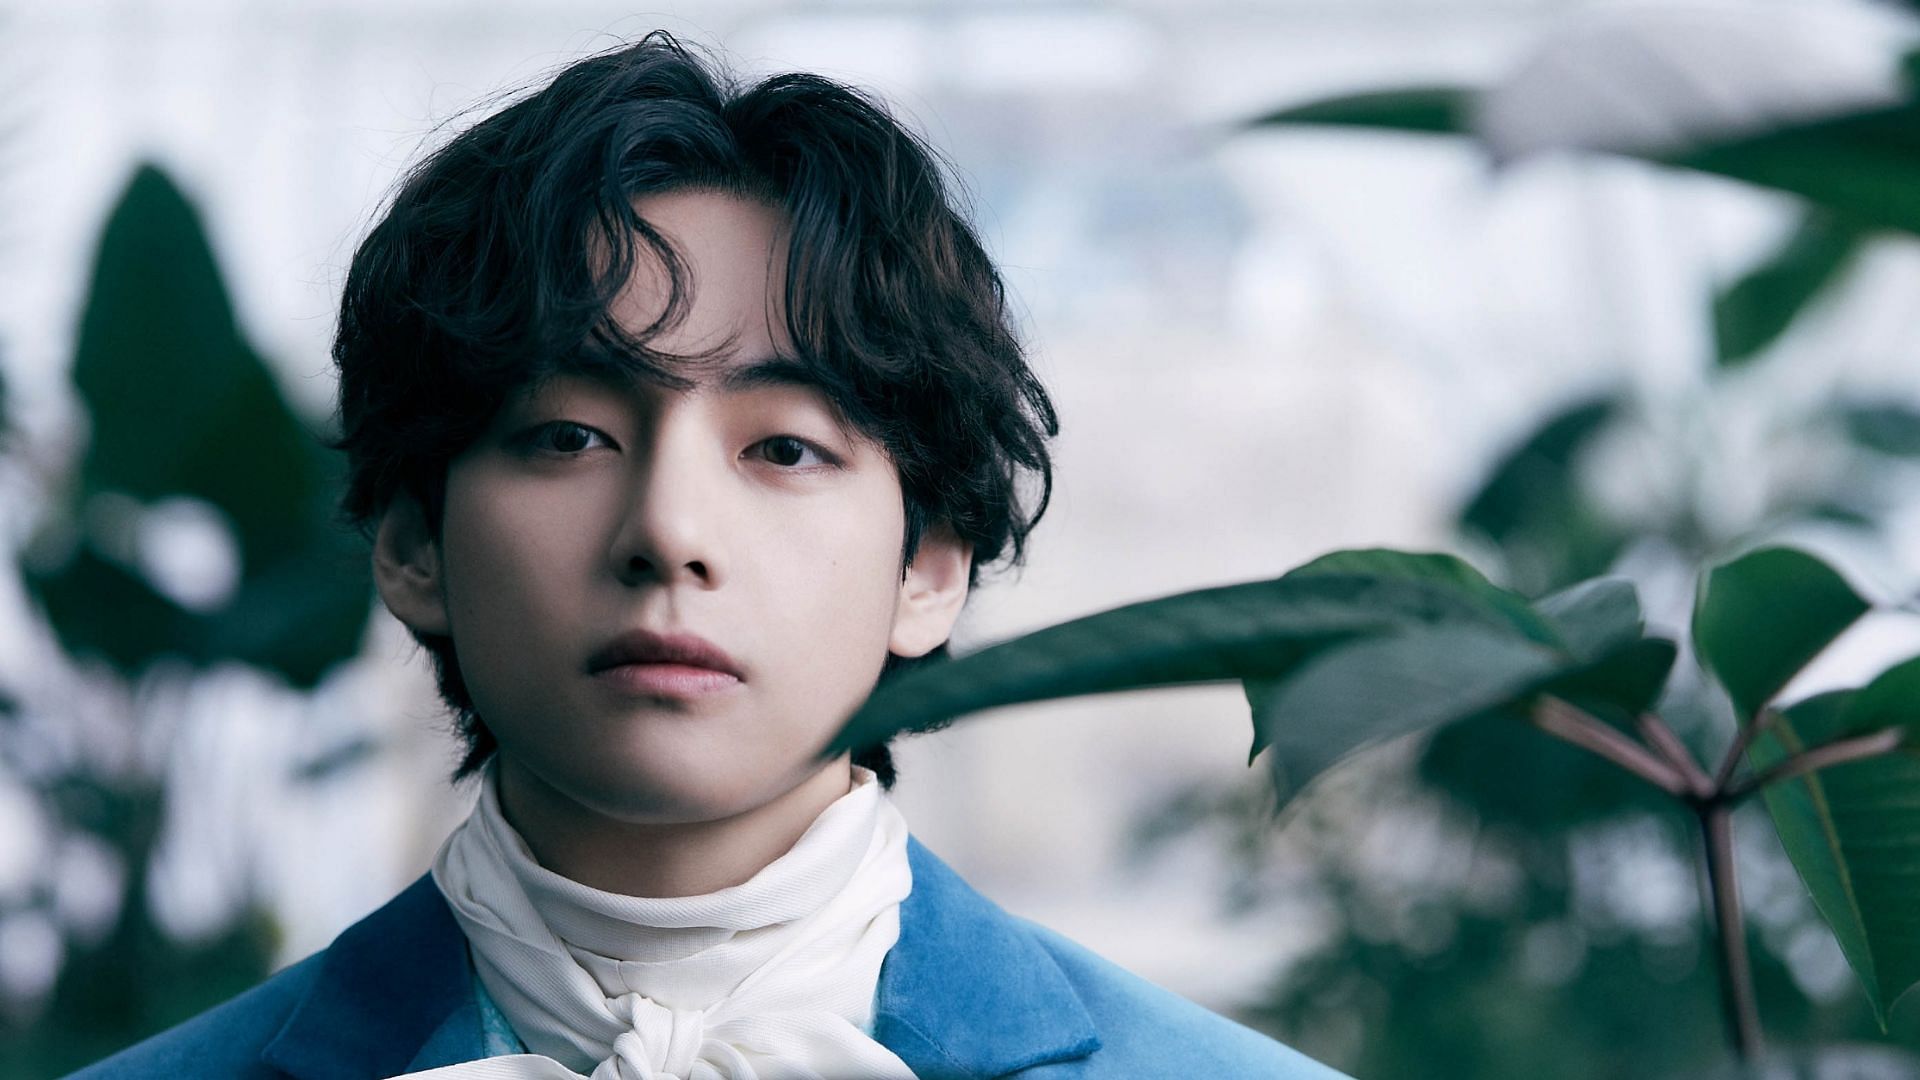 BTS's V becomes the 'Main Character' of the 2022 Grammys for his